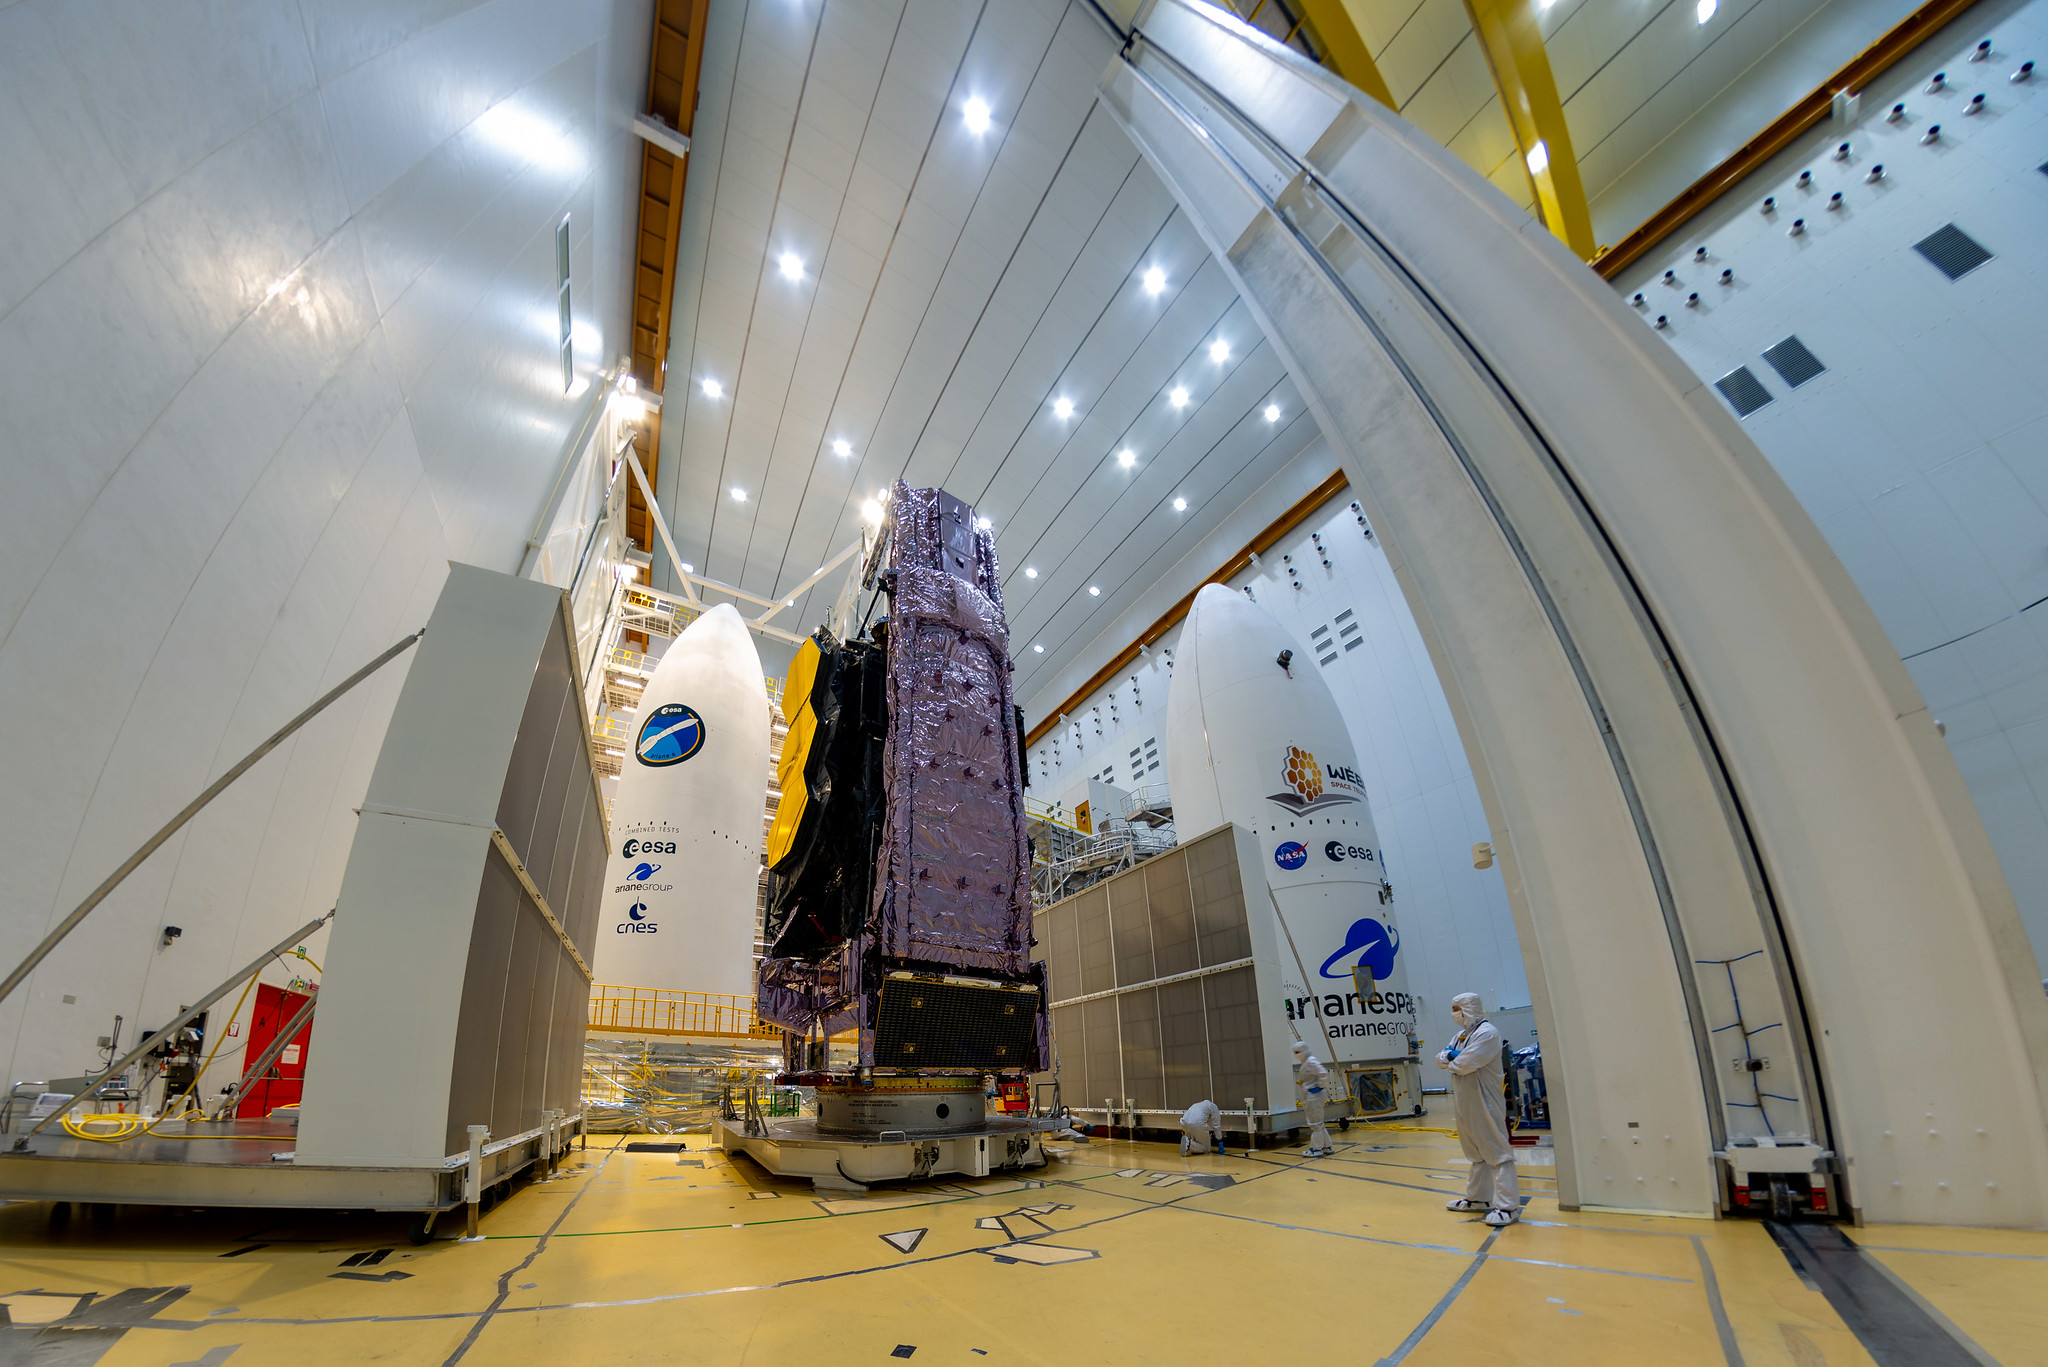 Daily News | Online News NASA's James Webb Space Telescope is seen during payload fairing encapsulation ahead of its installation atop its Ariane 5 rocket for a Dec. 24, 2021 launch from the Guiana Space Center in Kourou, French Guiana.